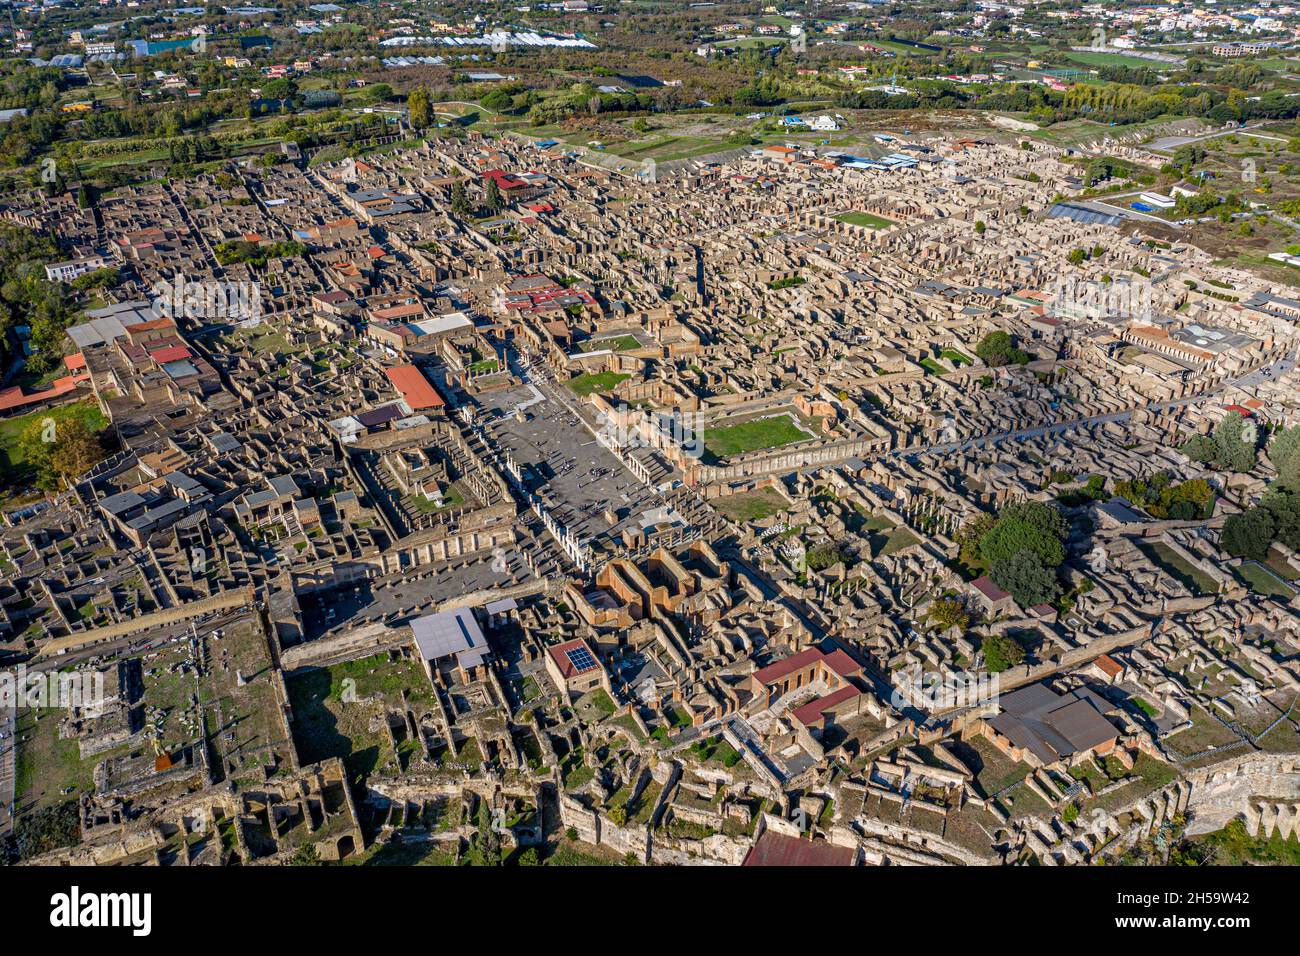 Pompei aus der Luft | Pompei from above with Drone Stock Photo